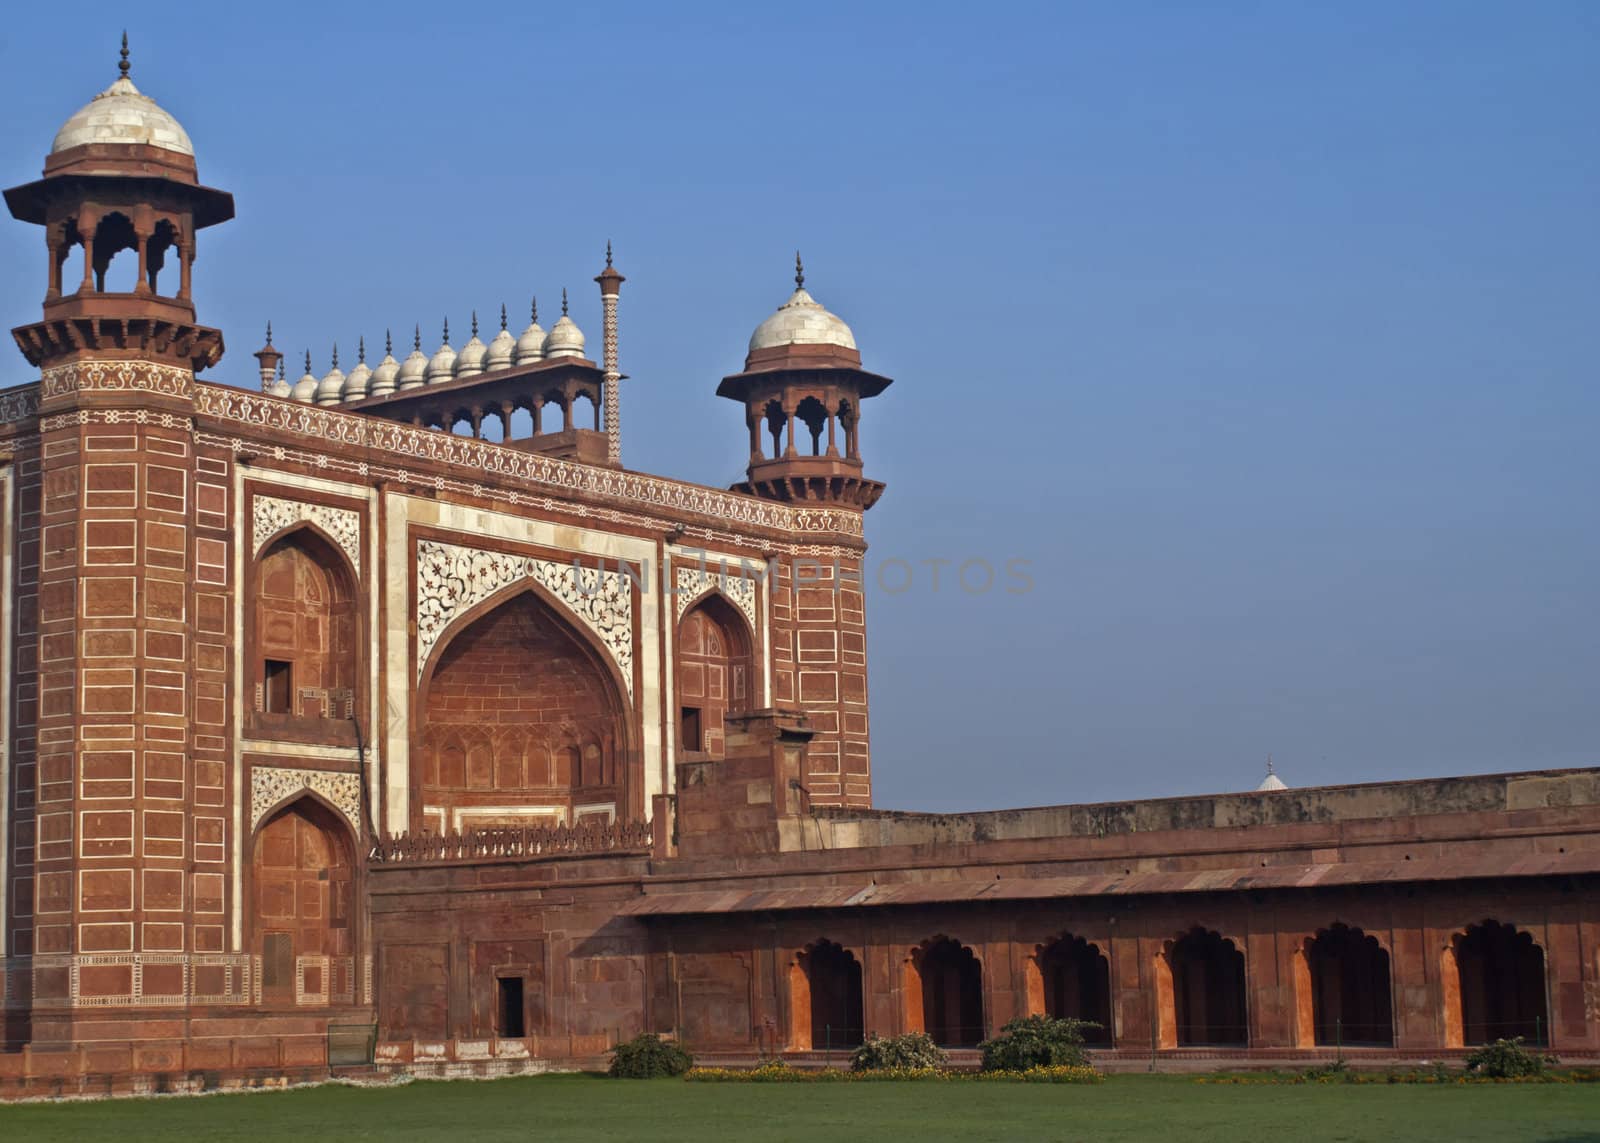 Green lawn, blue skies, red walls, and white marble decorations topped by a line of chhatris.